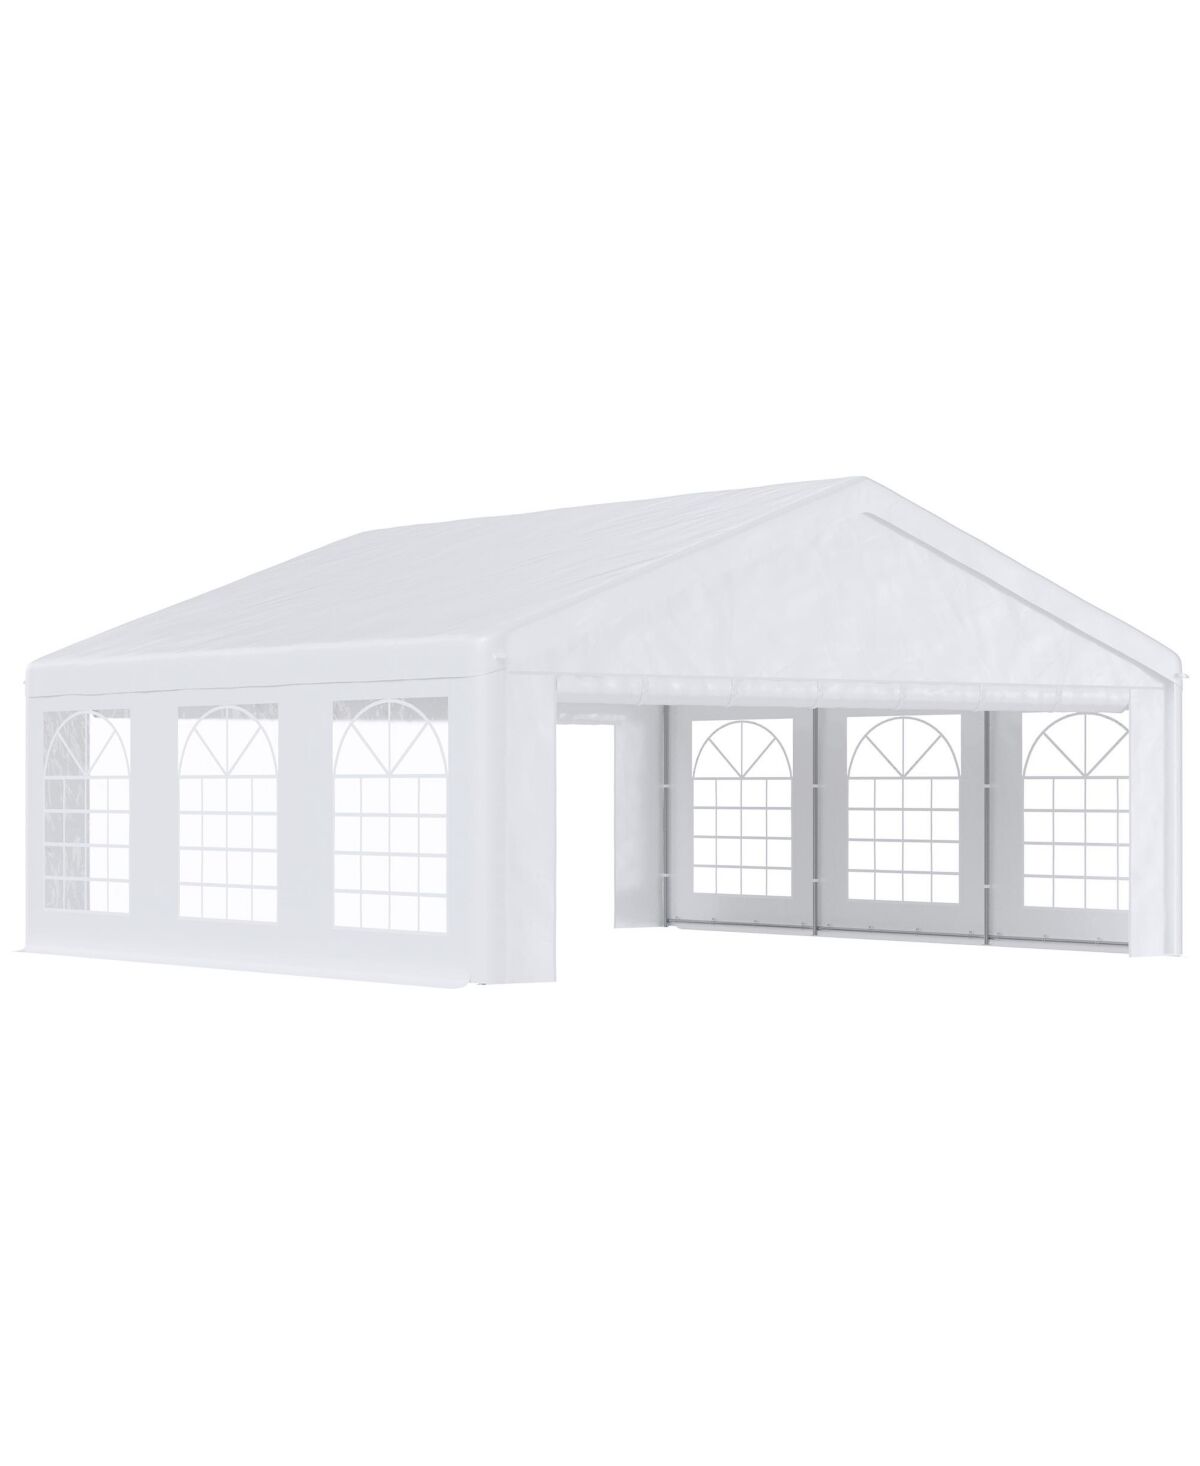 Outsunny 20' x 20' Heavy Duty Party Tent & Carport with Removable Sidewalls and 2 Doors, Outdoor Canopy Tent Sun Shade Shelter, for Parties, Wedding,